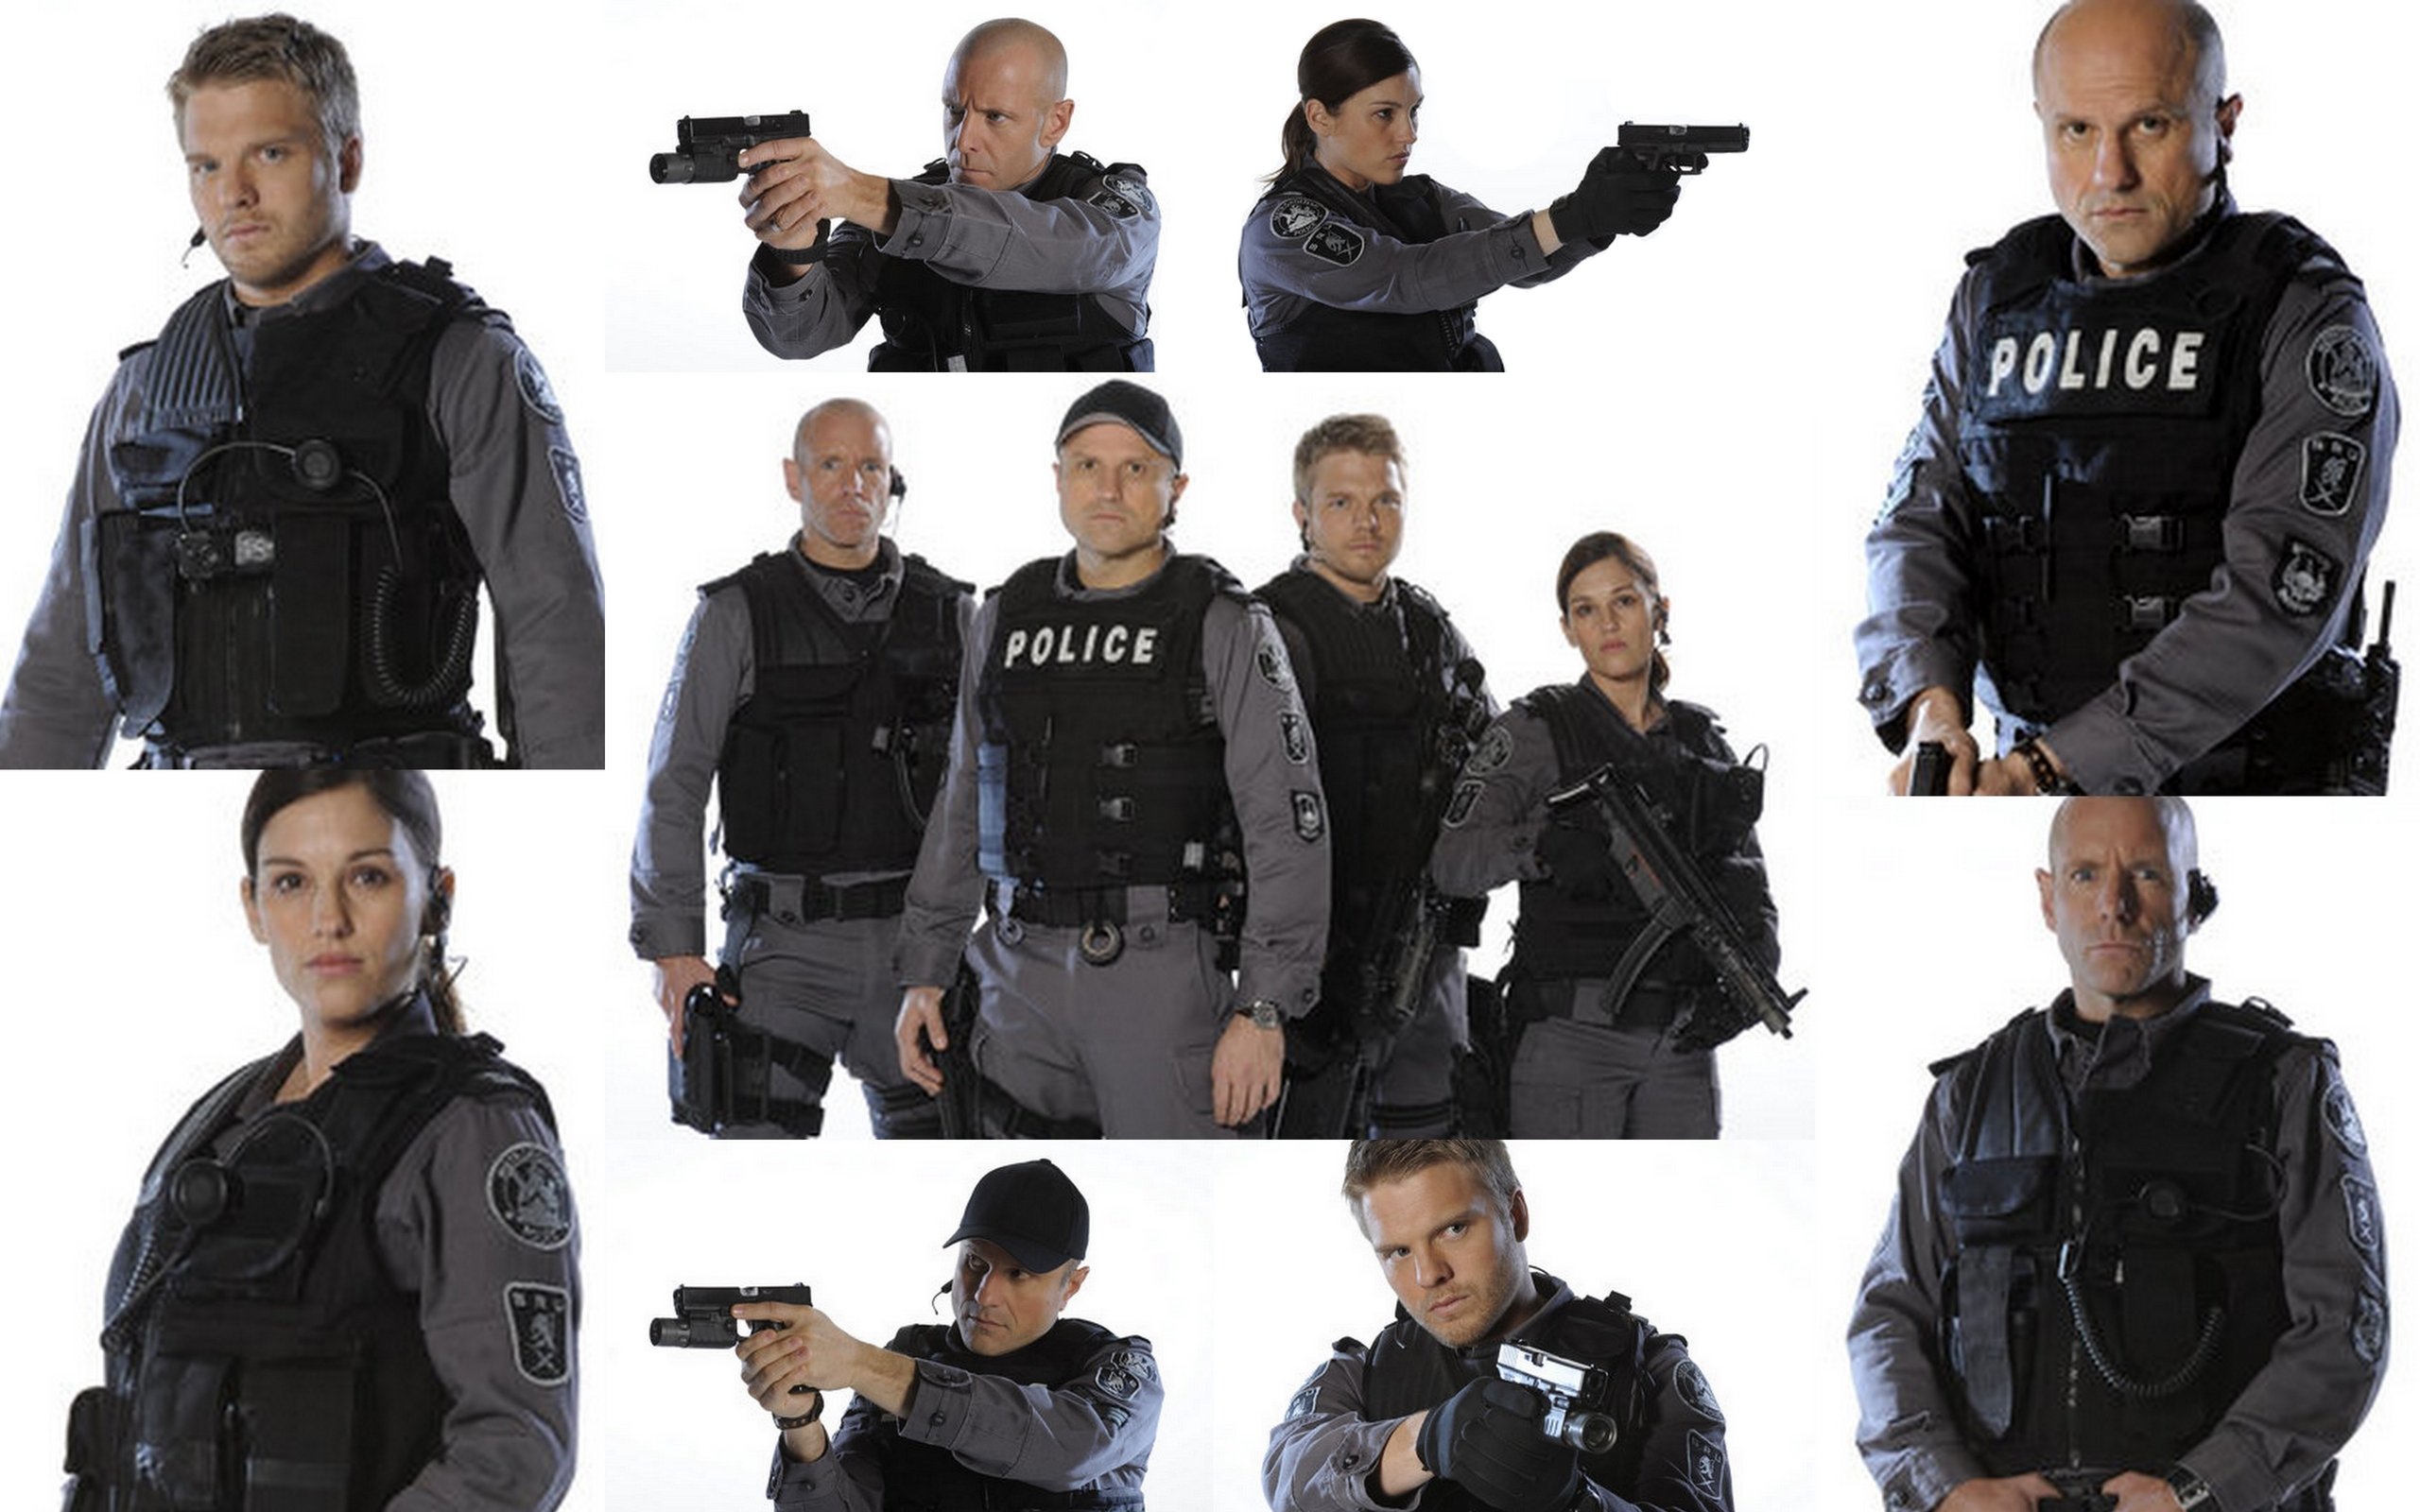 flashpoint, Action, Crime, Drama, Series,  31 Wallpaper